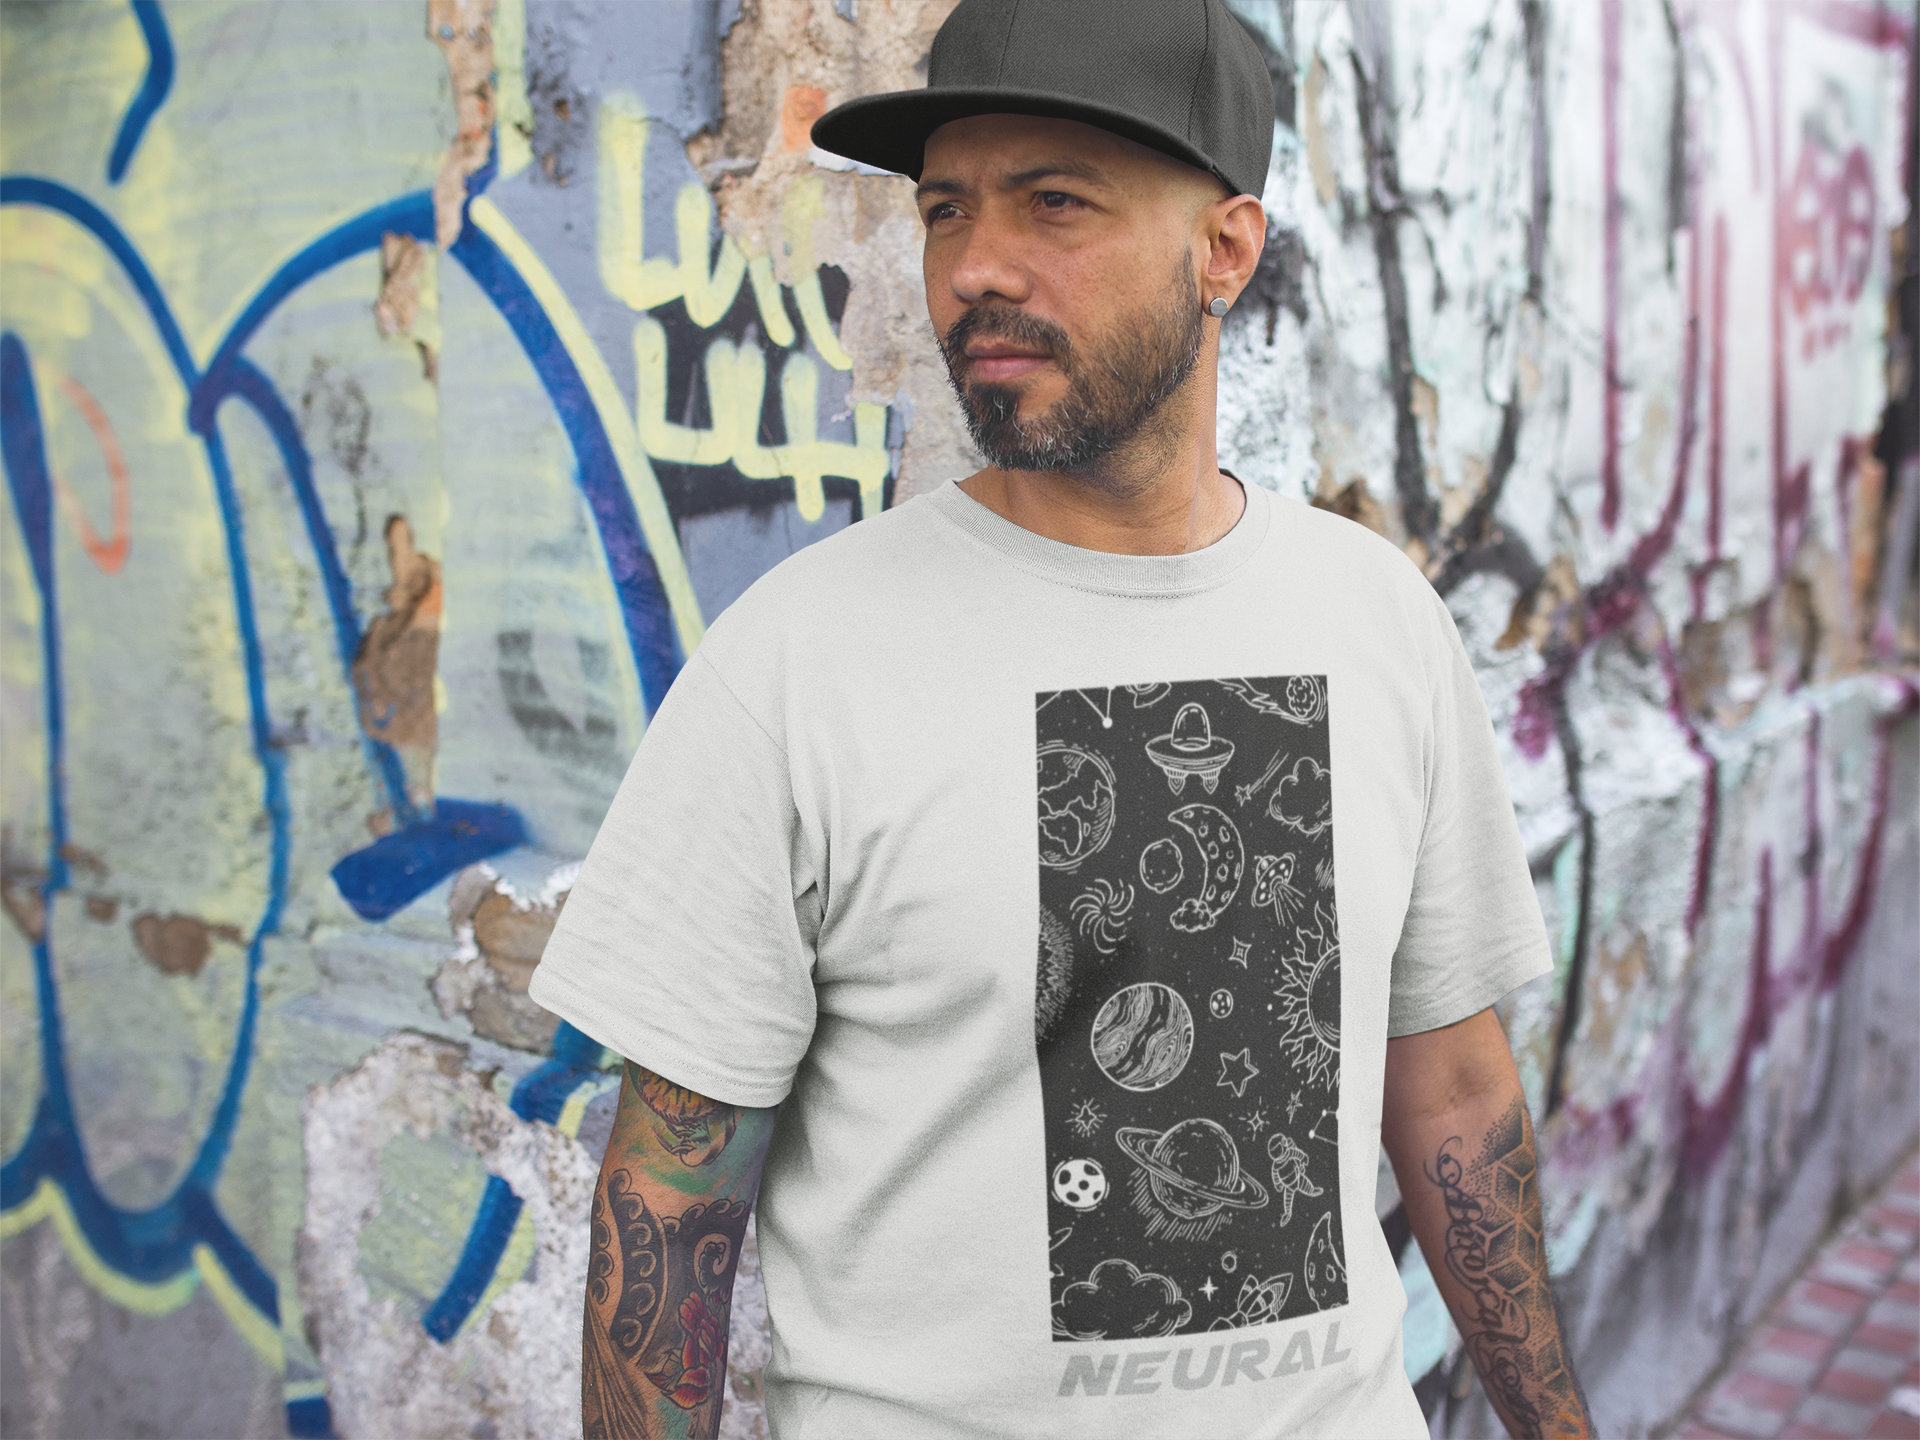 tattooed-middle-aged-man-wearing-a-round-neck-tee-mockup-against-a-graffiti-wall-a16976.png